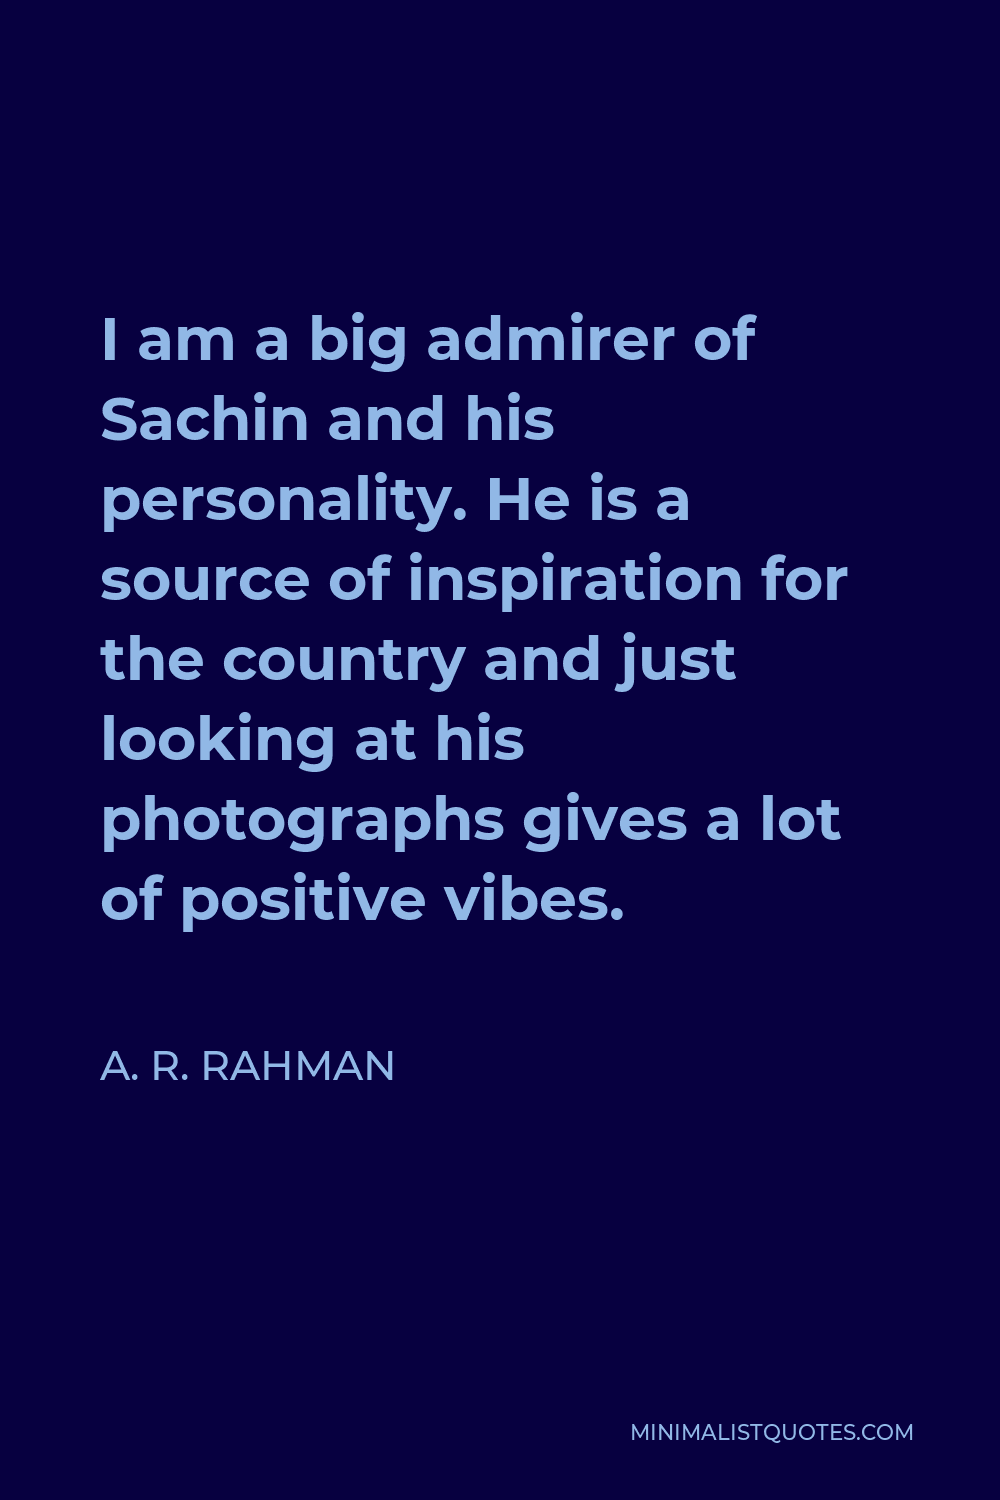 A. R. Rahman Quote - I am a big admirer of Sachin and his personality. He is a source of inspiration for the country and just looking at his photographs gives a lot of positive vibes.